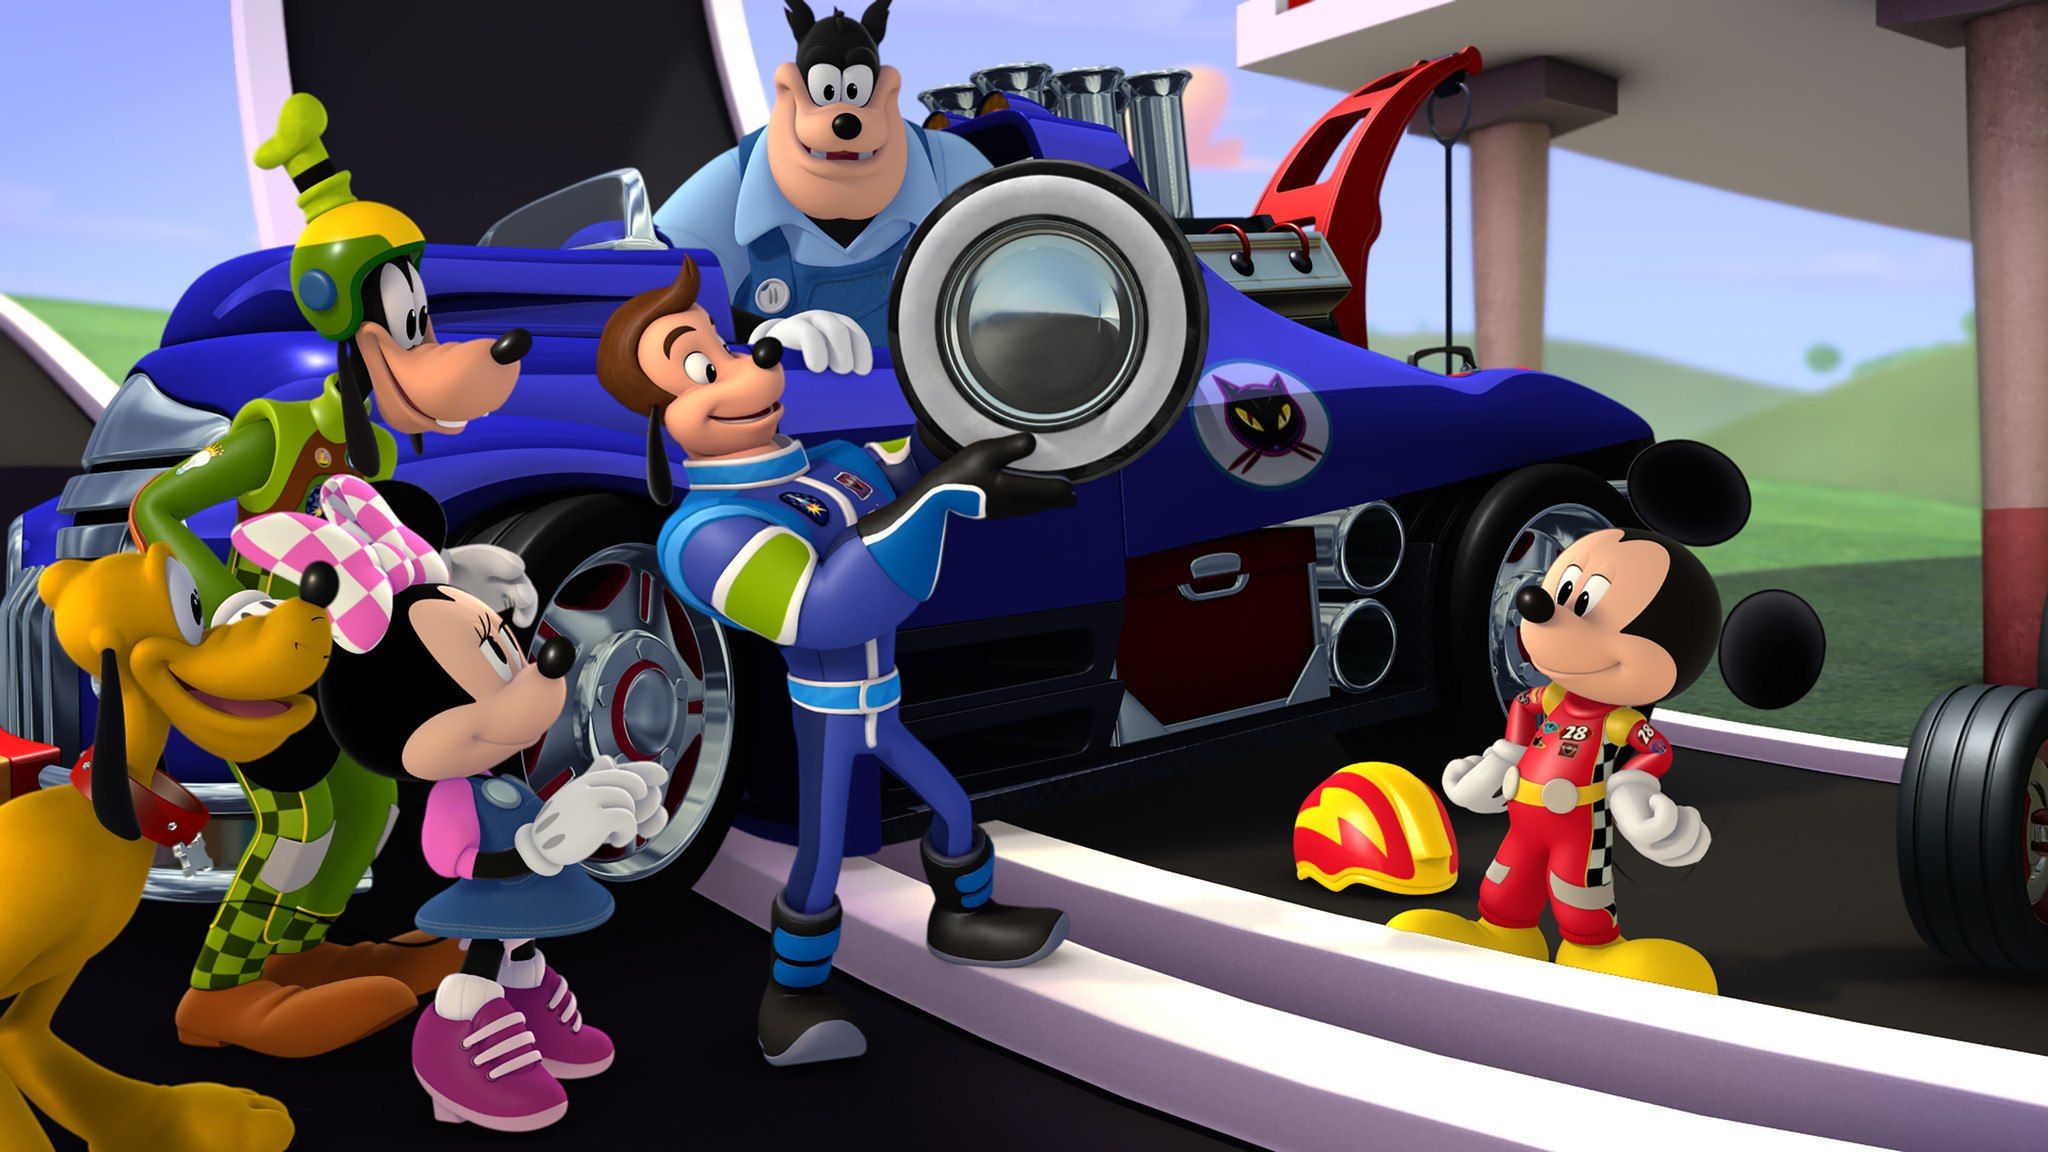 Mickey and the Roadster Racers' to Debut. Animation World Network